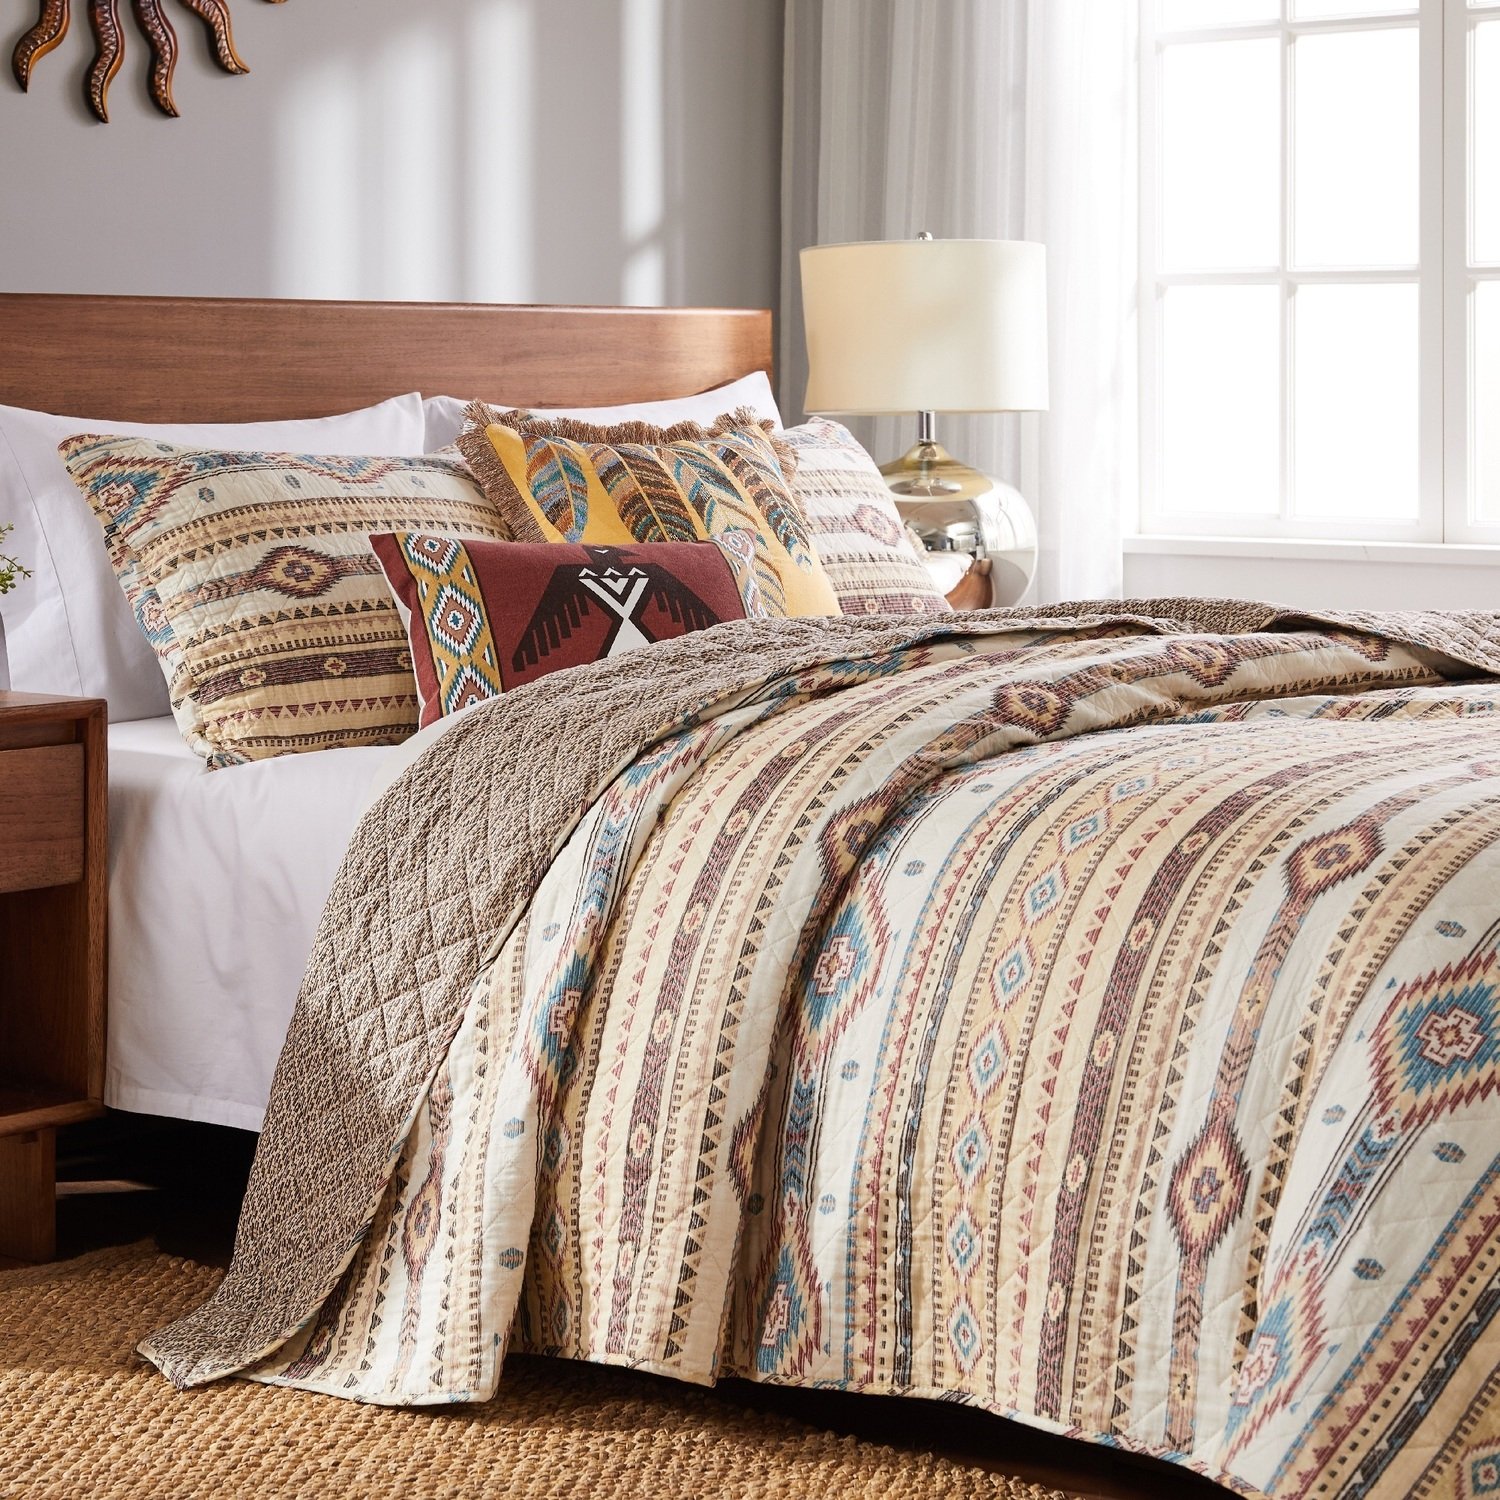 full quilt bedding Greenland Home Fashions Quilt Set Tan